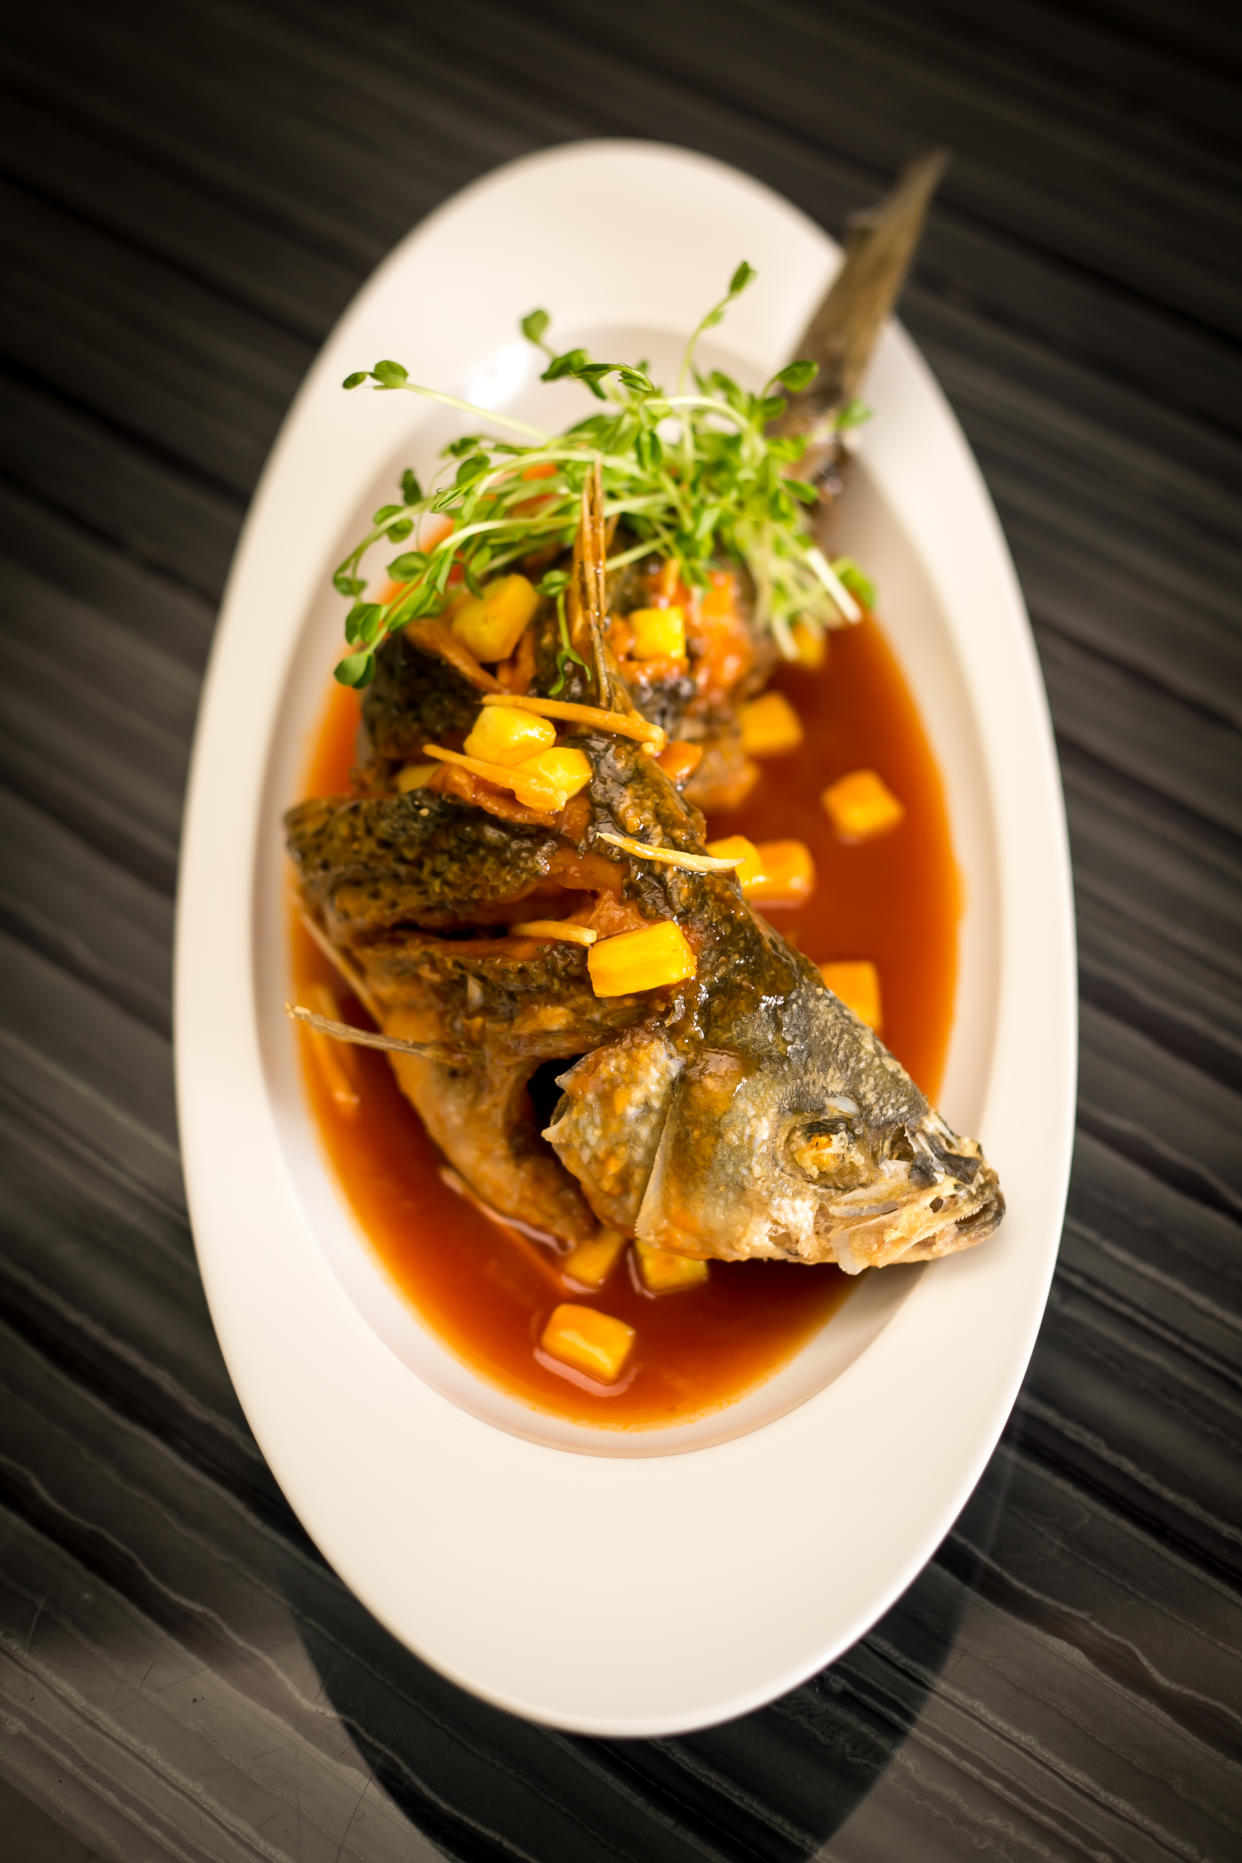 The crispy whole fish served at Umi Sushi and Oyster Bar. (Photo: Umi Sushi and Oyster Bar)